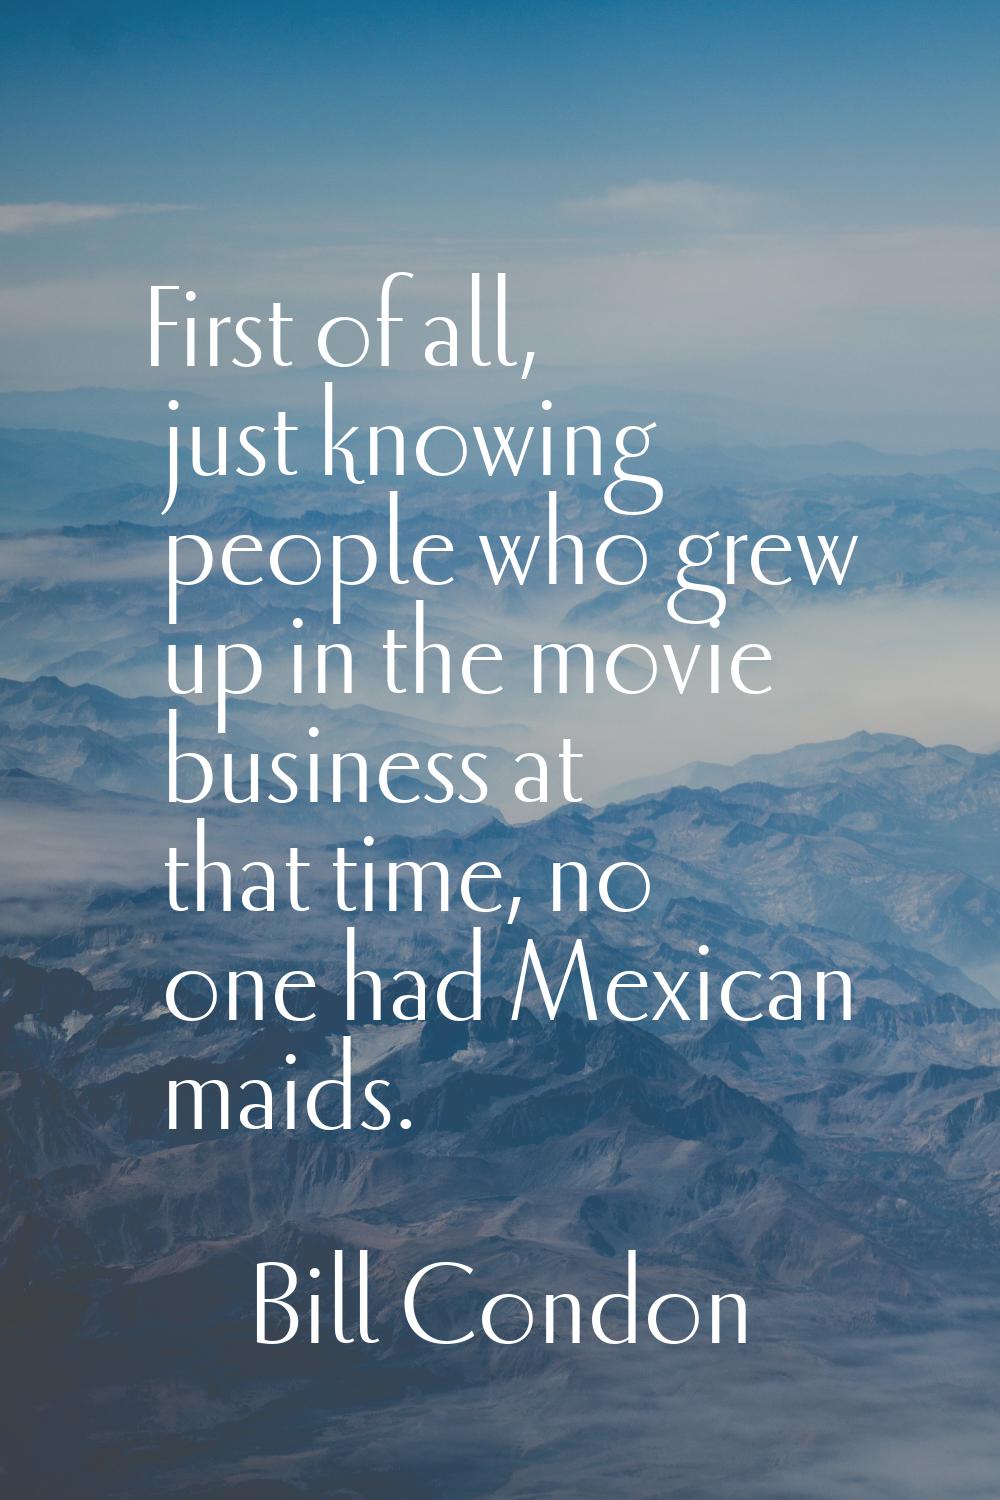 First of all, just knowing people who grew up in the movie business at that time, no one had Mexica